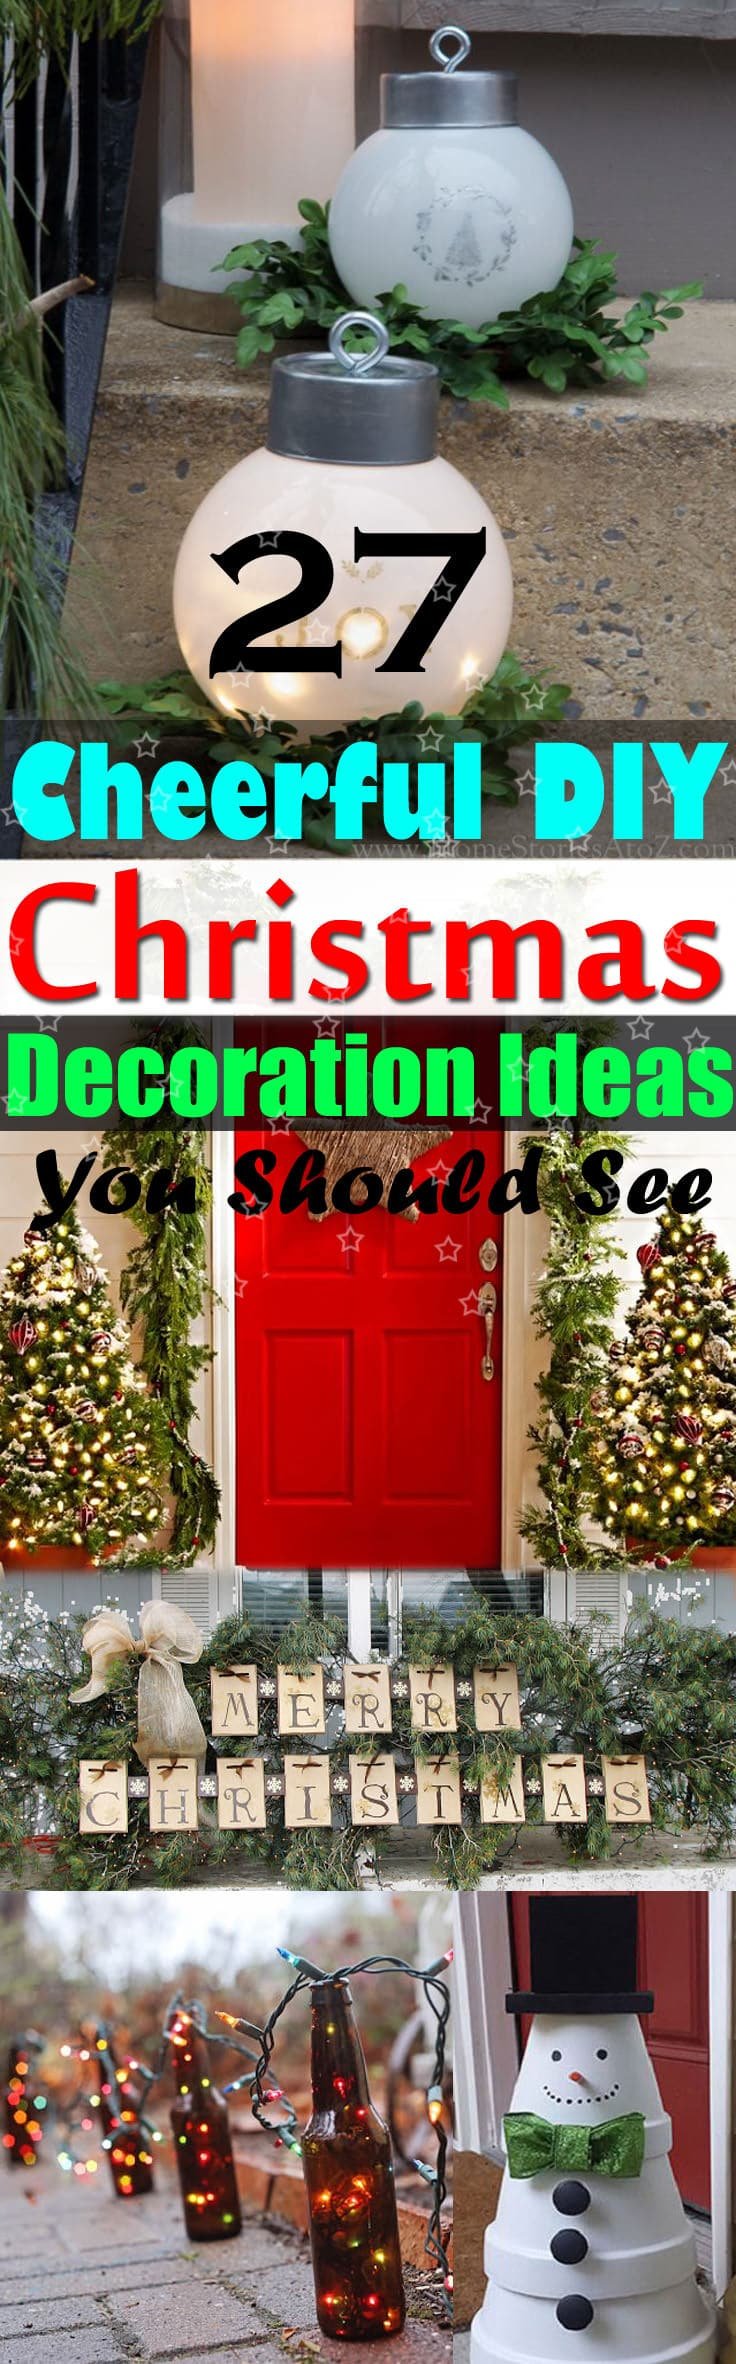 Take a look at these 27 DIY Christmas decoration ideas. They are cheap, easy and fun and following them can make your festive season special!